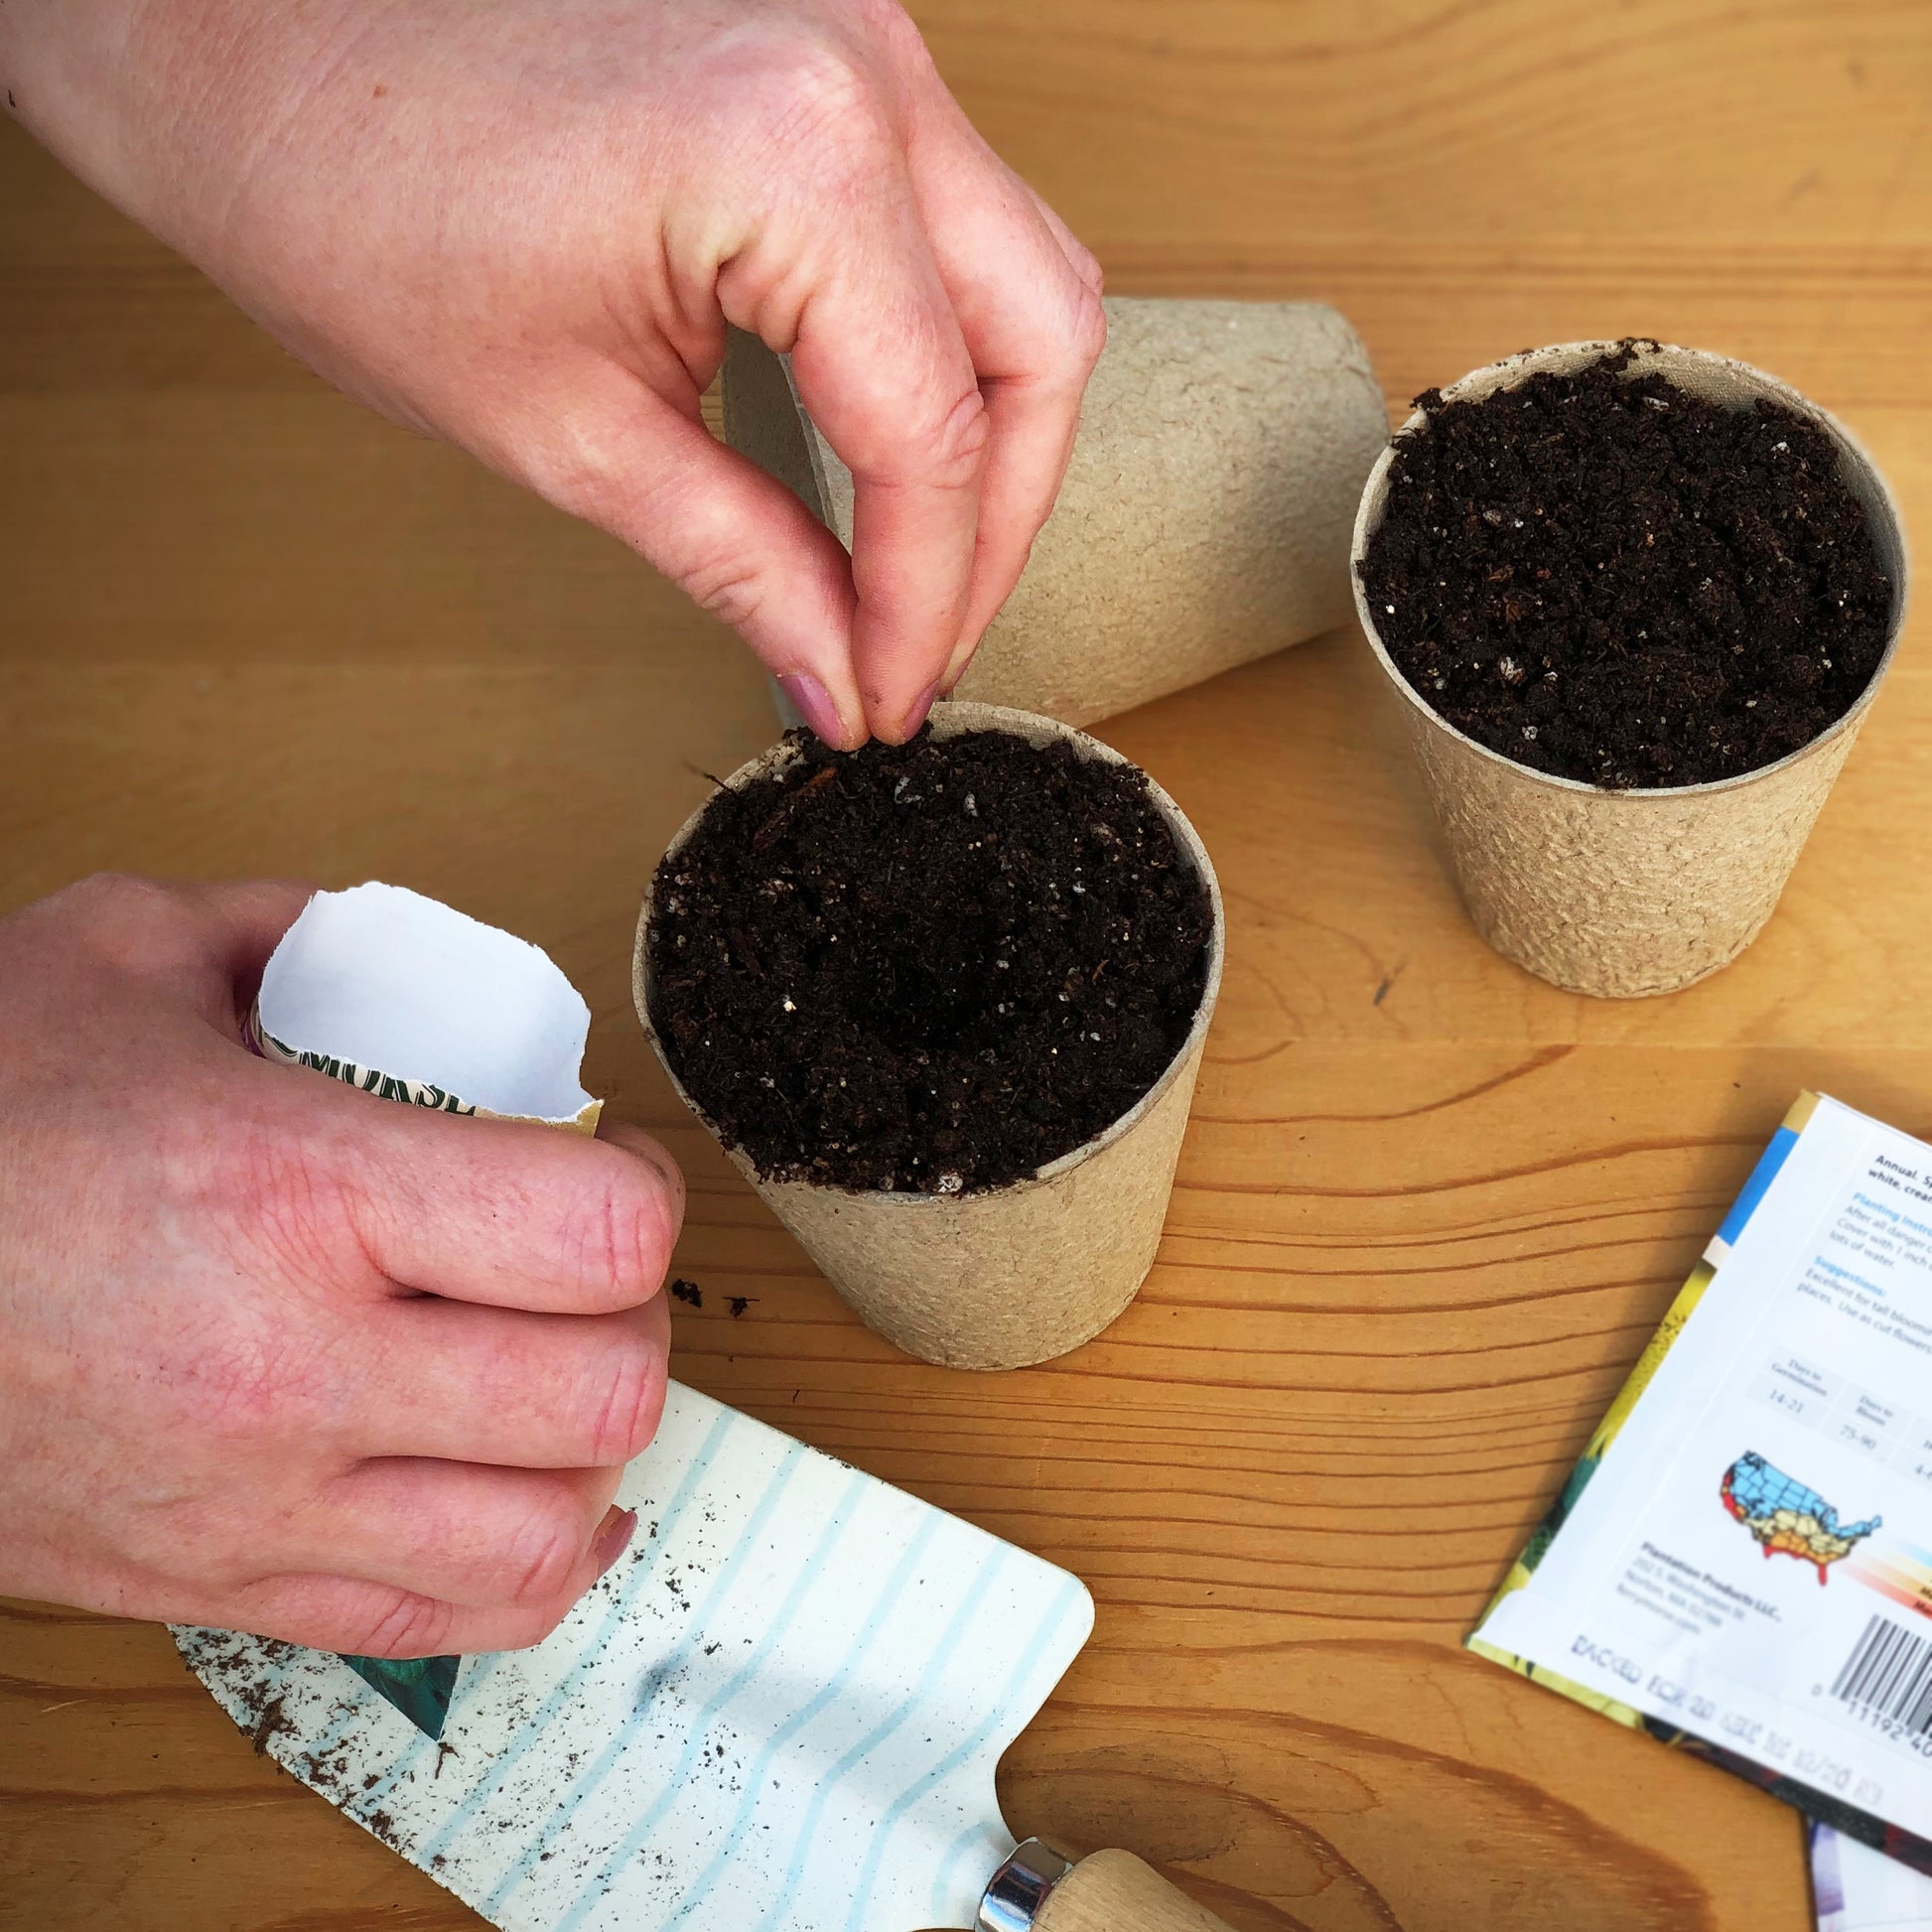 Get your Organic Straight Eight Cucumber seeds going in biodegradable Jiffy peat pots so that when you have to transplant them to their forever home, you can plant the pot and all to prevent root shock.